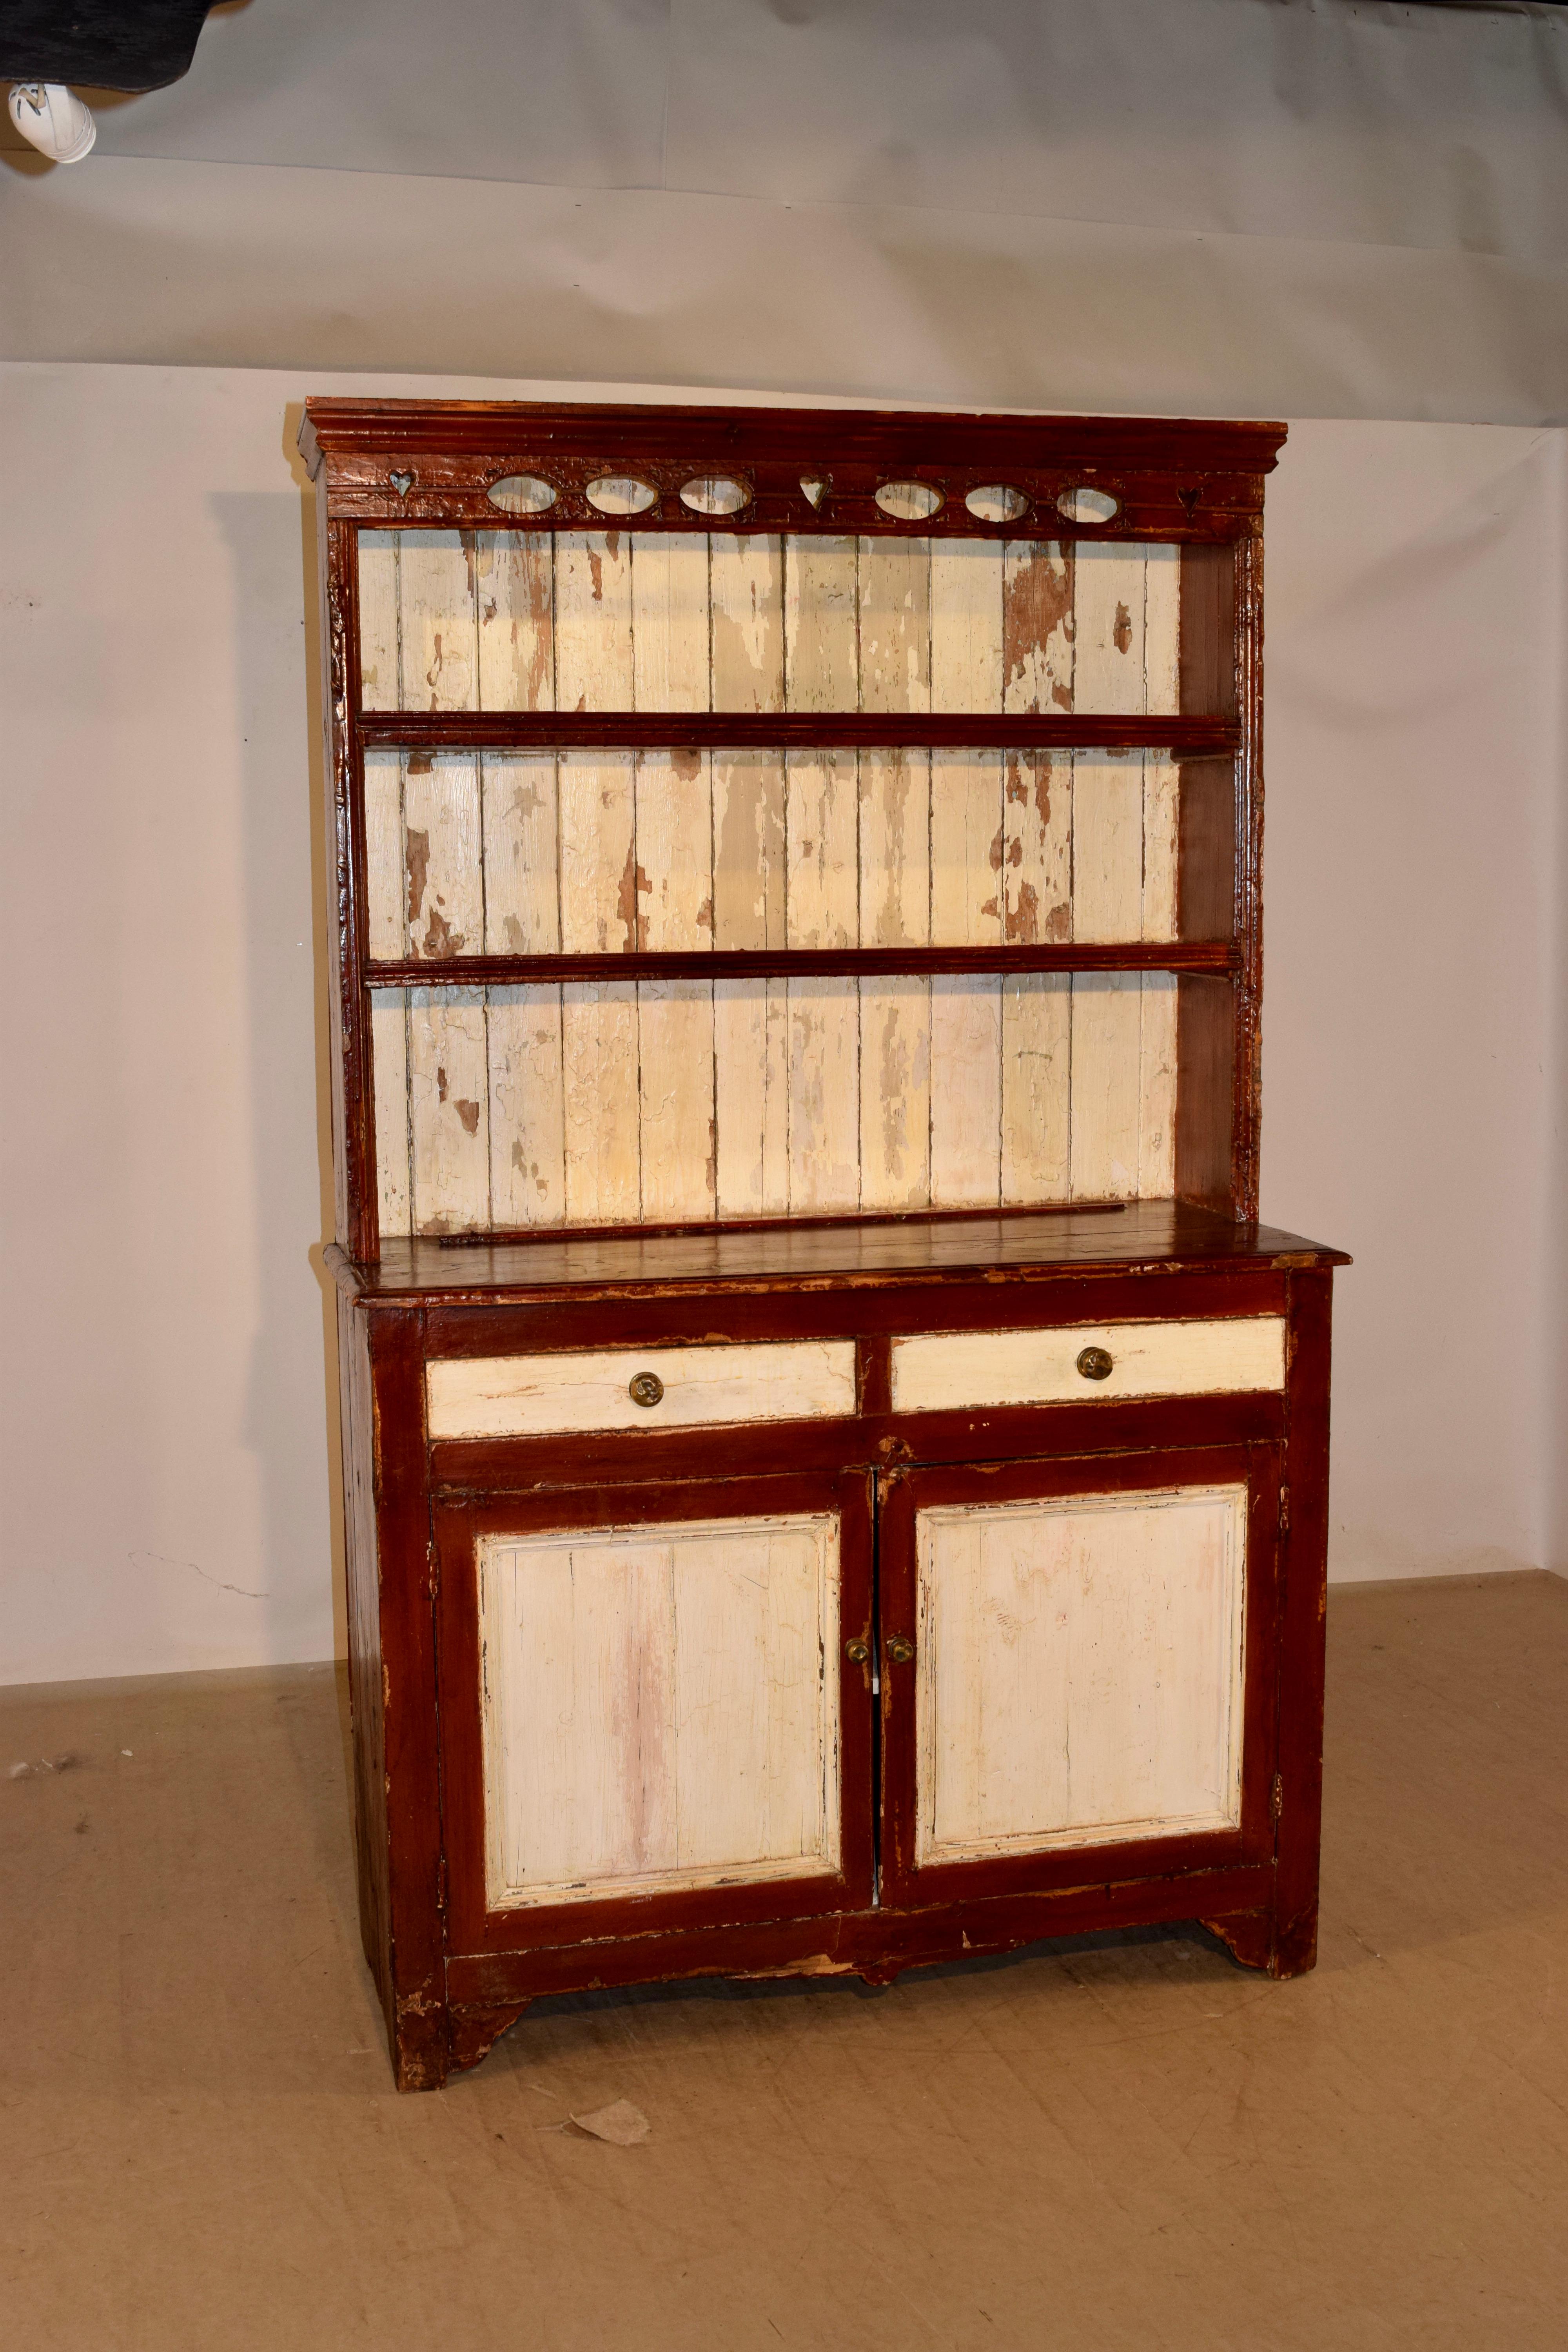 A charming Irish country painted pine step-back cupboard with three open shelves above a lower cabinet with two drawers over two doors, which open to reveal shelving. The cabinet has open fretwork at the top, beneath the crown for added interest and